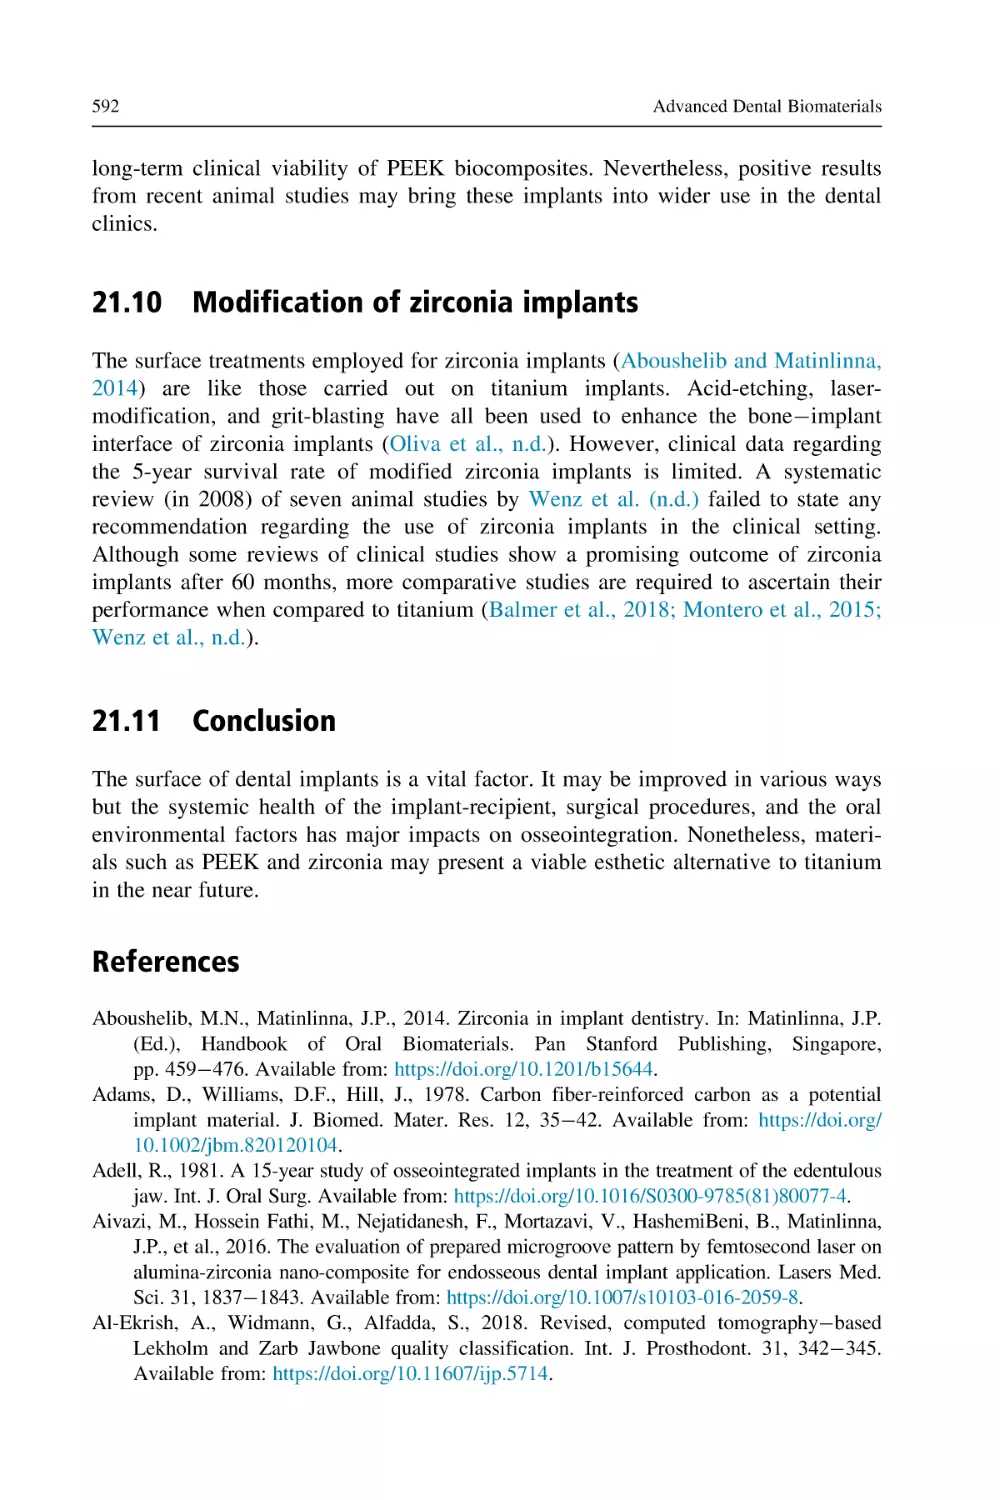 21.10 Modification of zirconia implants
21.11 Conclusion
References